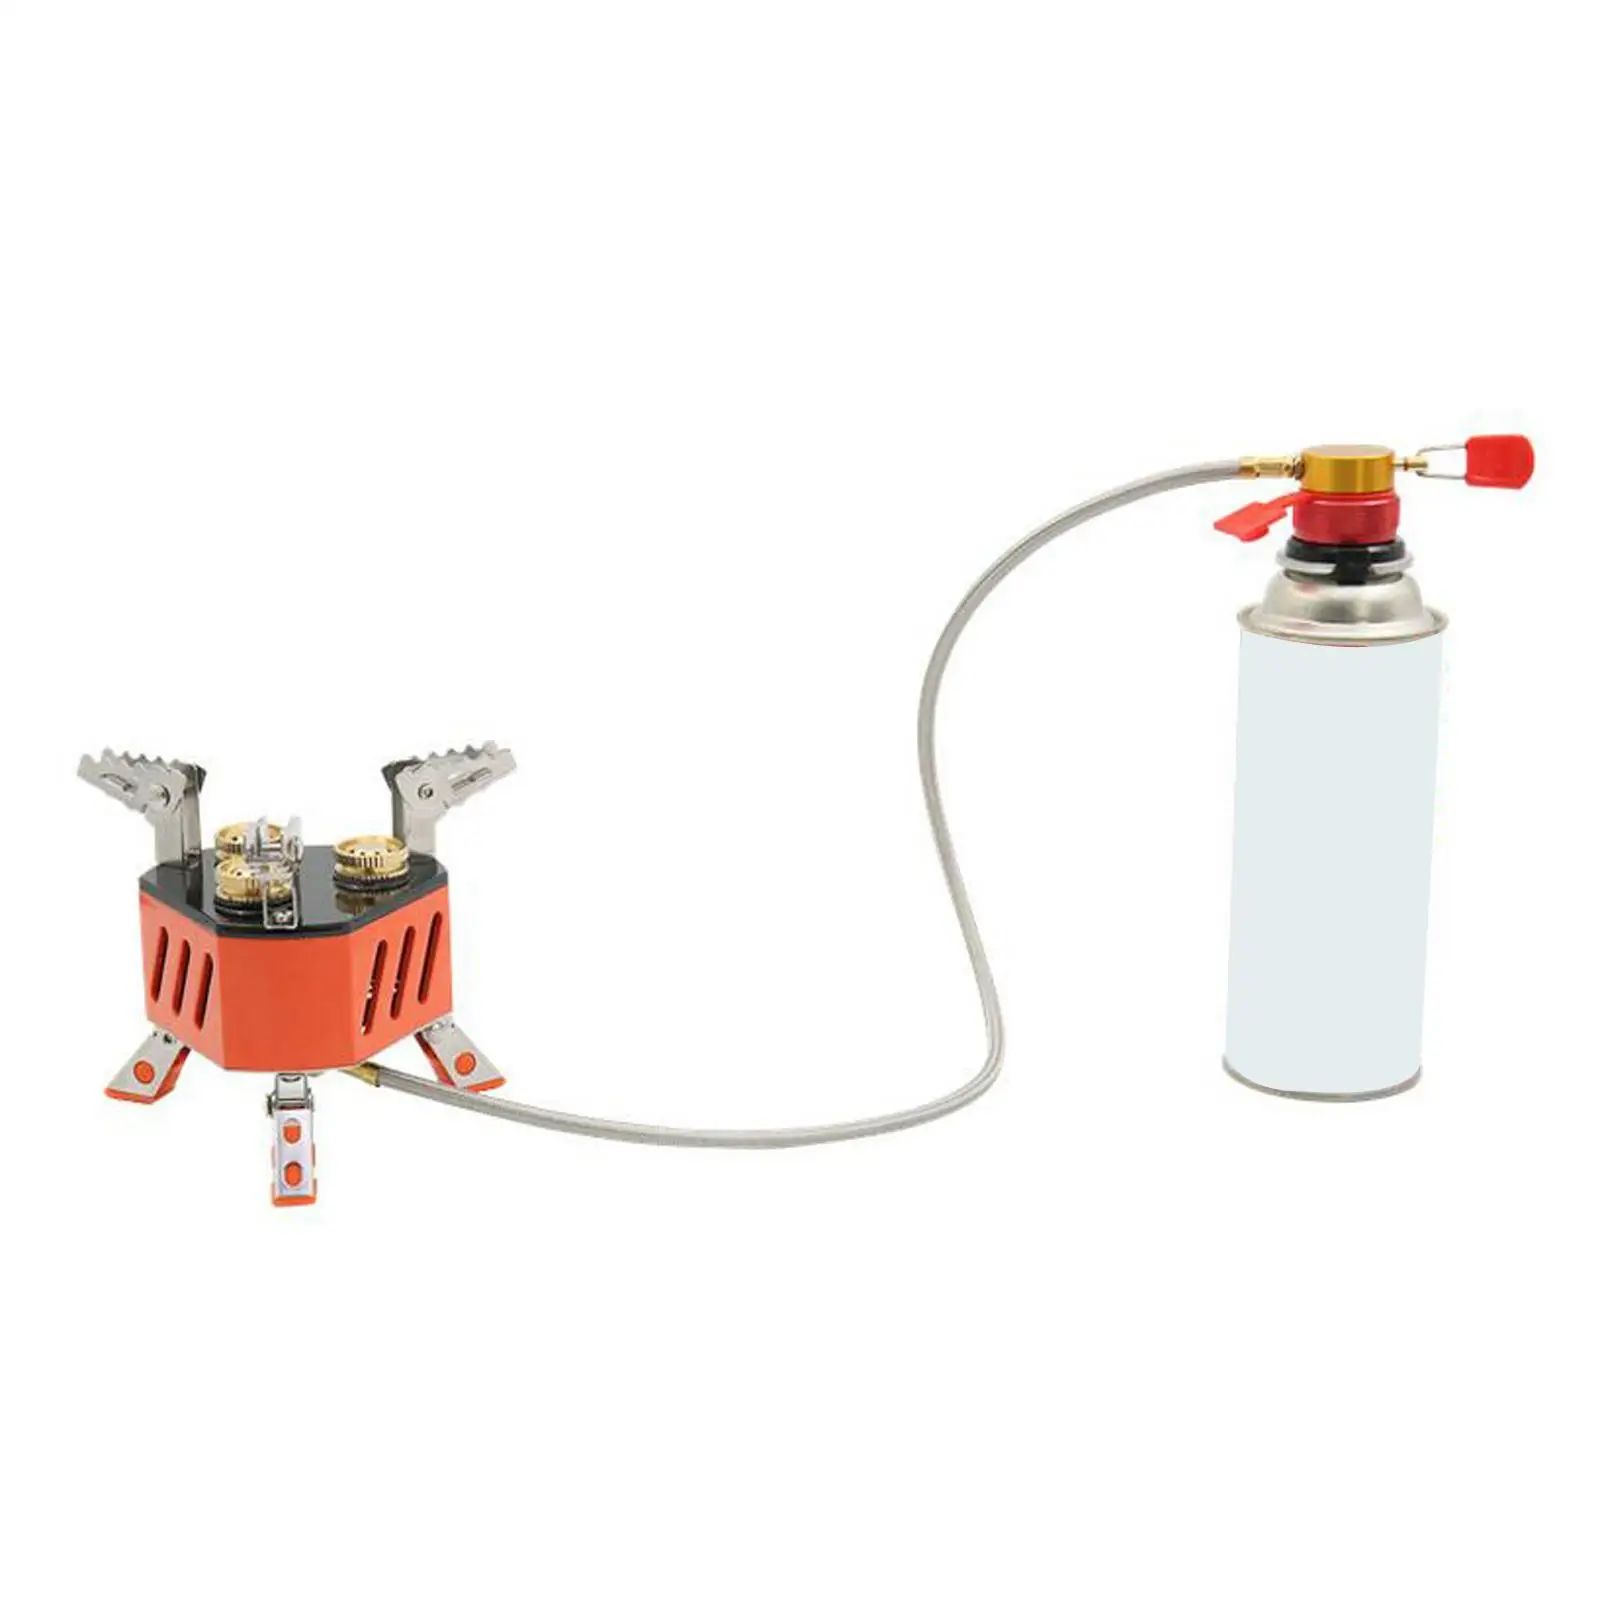 11800W Portable Camping Stove Outdoor Gas Burner Butane Propane Burner Mini Stove Cooker for Hiking Cooking Cookware